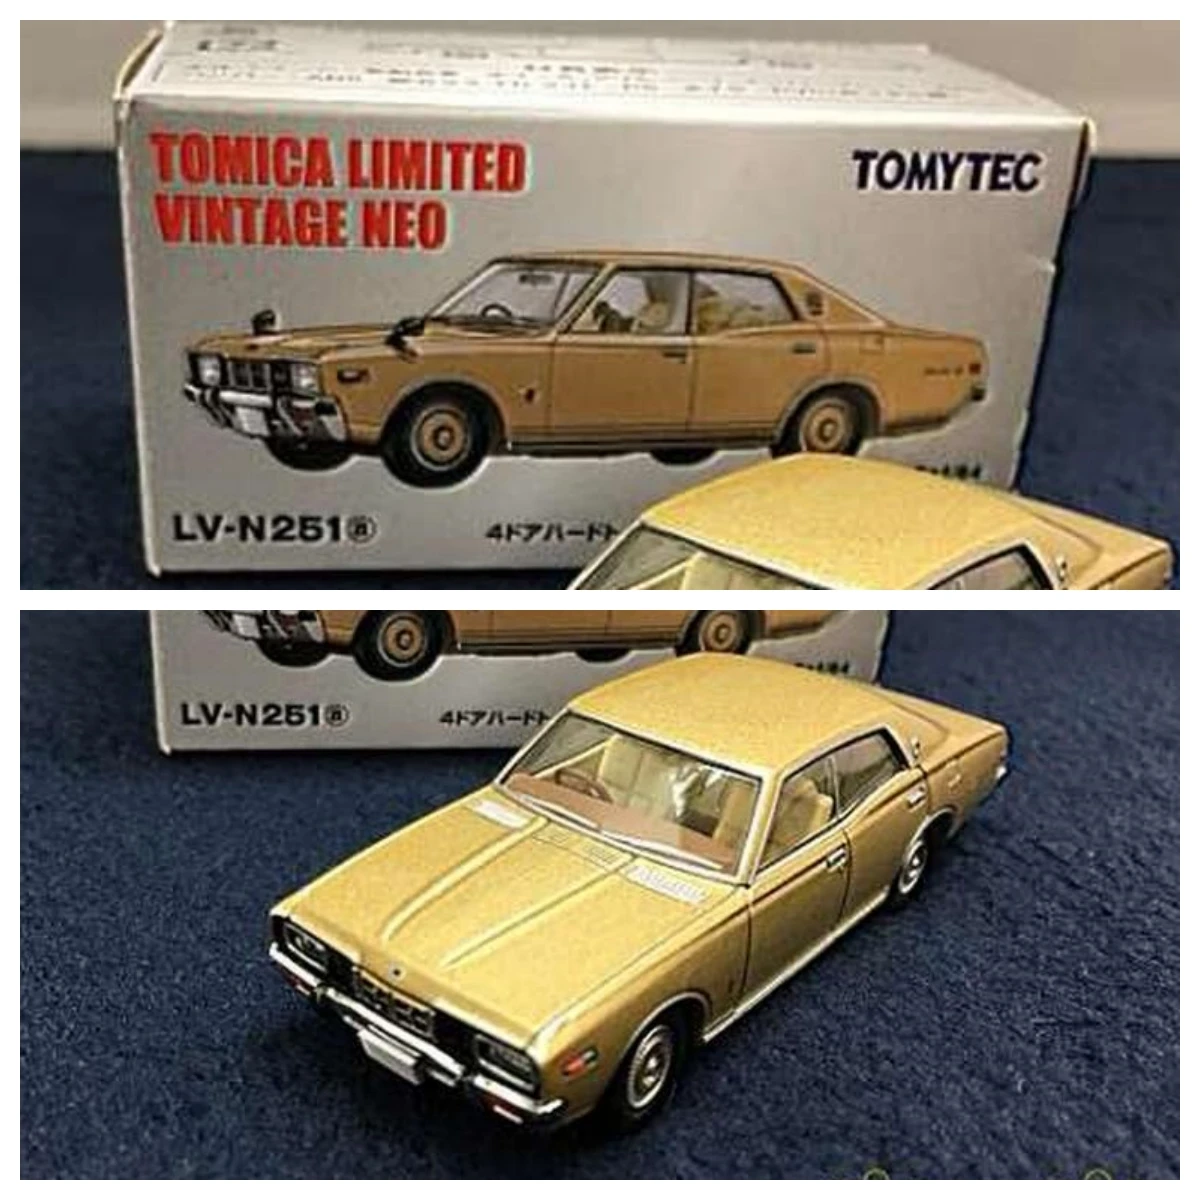 

Tomica Limited Vintage Neo 1/64 LV-N251a Gloria 4-Door HT F-Type 2800SGL Diecast Model Car Collection Limited Edition Hobby Toys